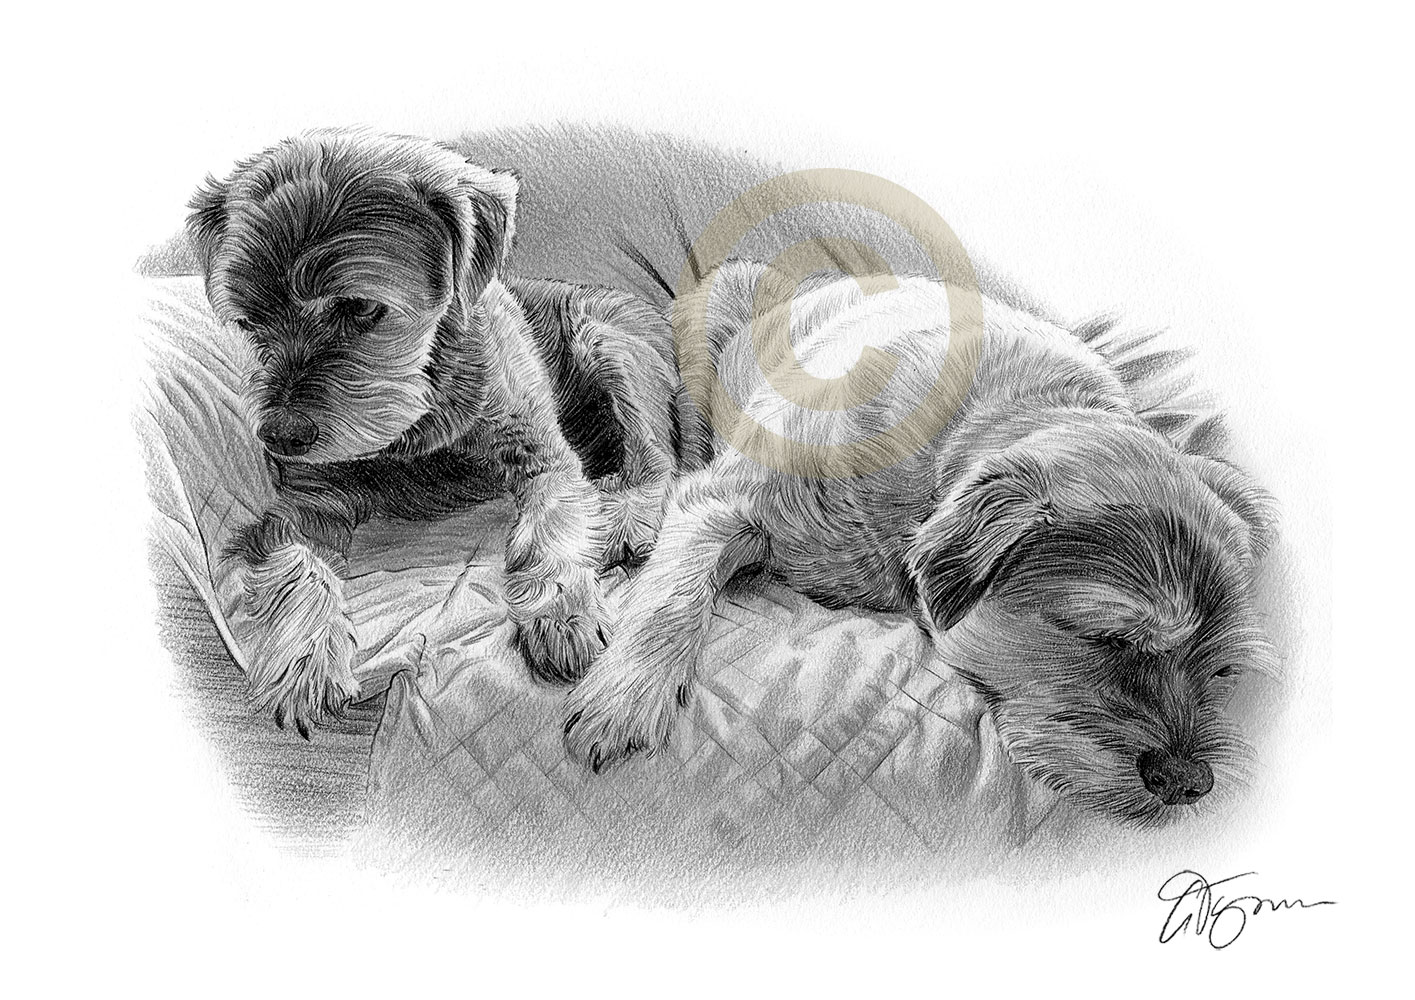 Pet portrait commission of two border terriers by artist Gary Tymon